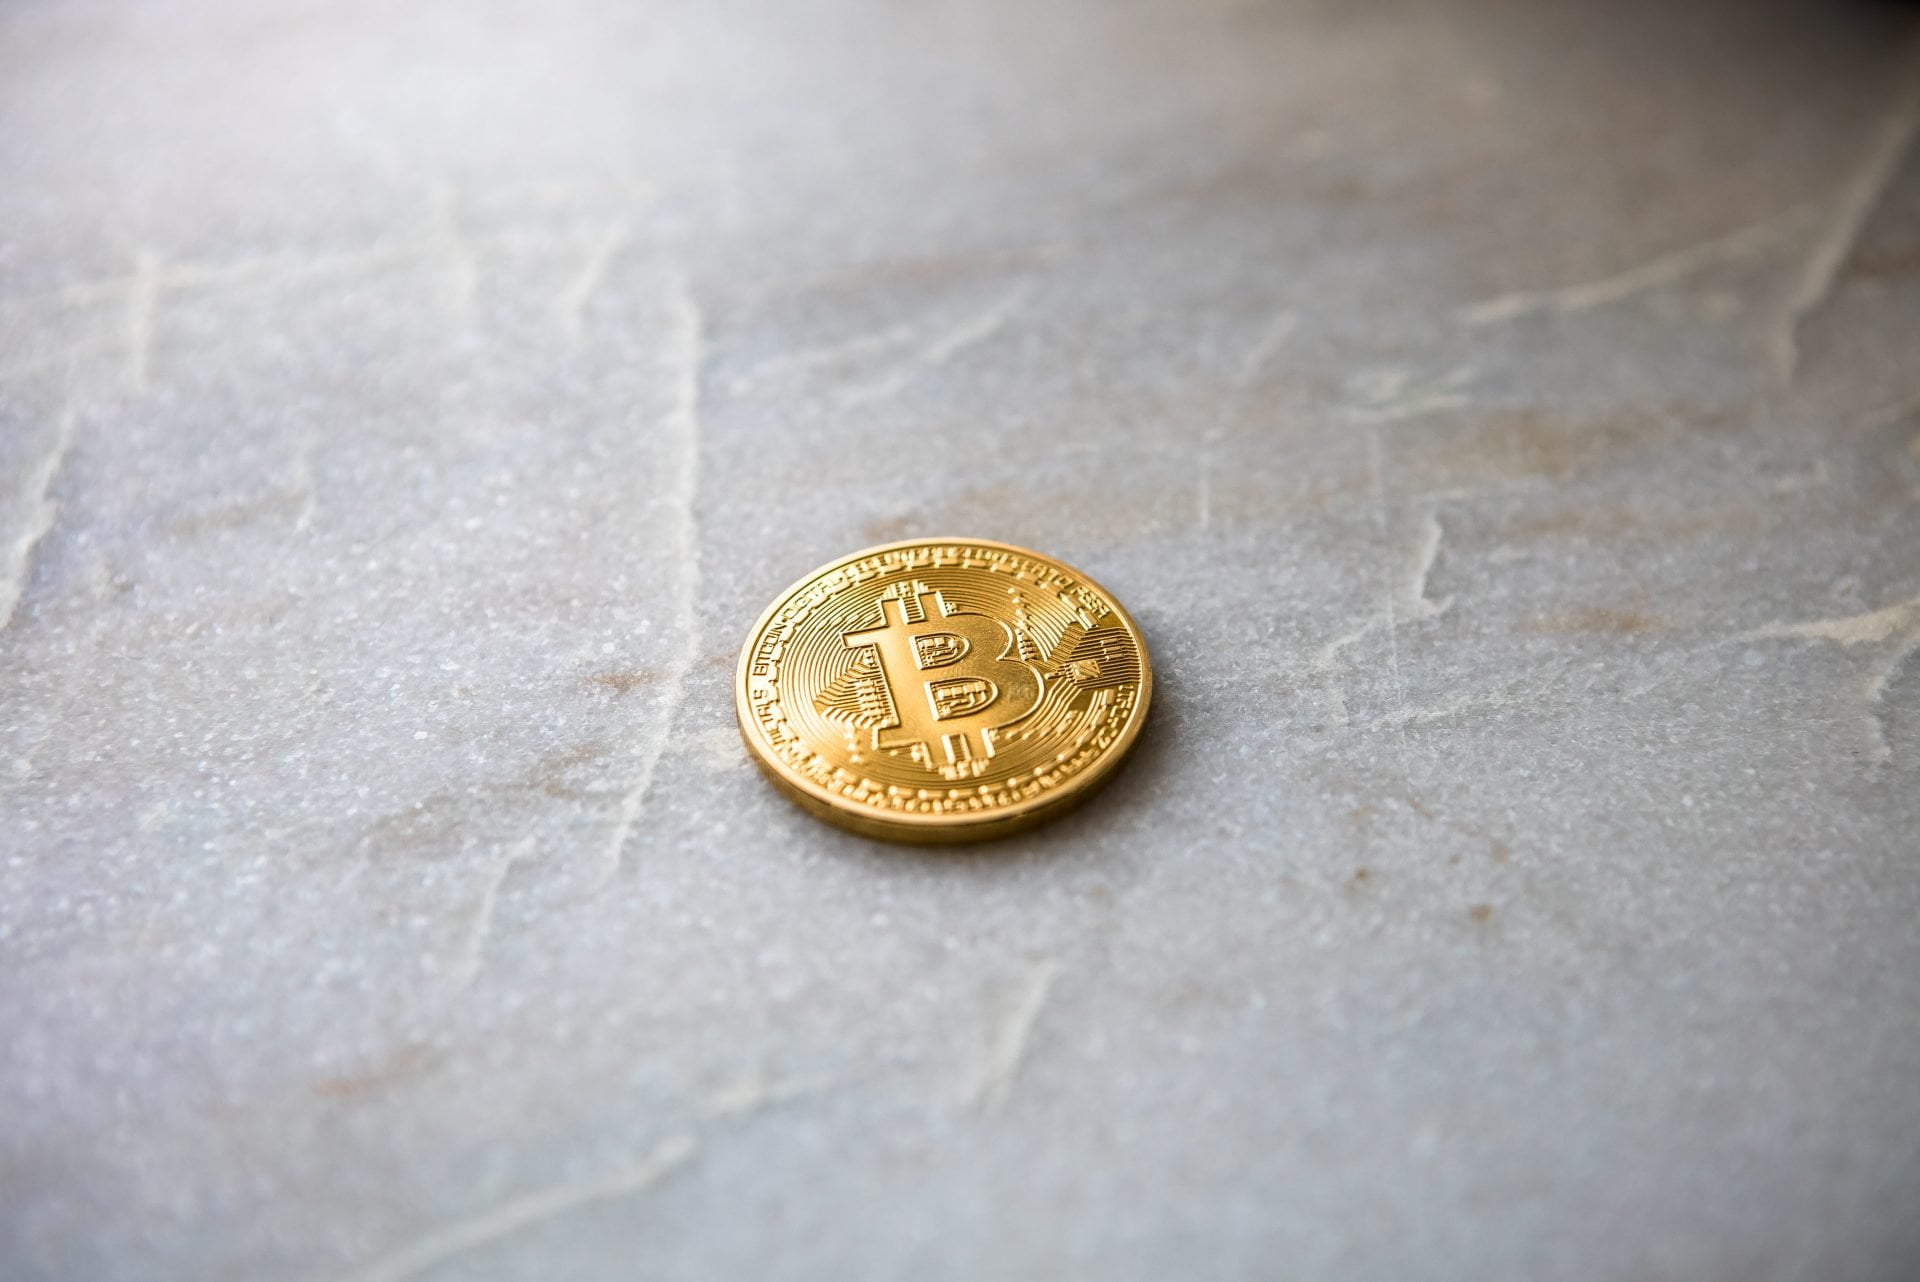 Institutional Bitcoin Interest Wanes as BTC Price Falls Under $10,000 21